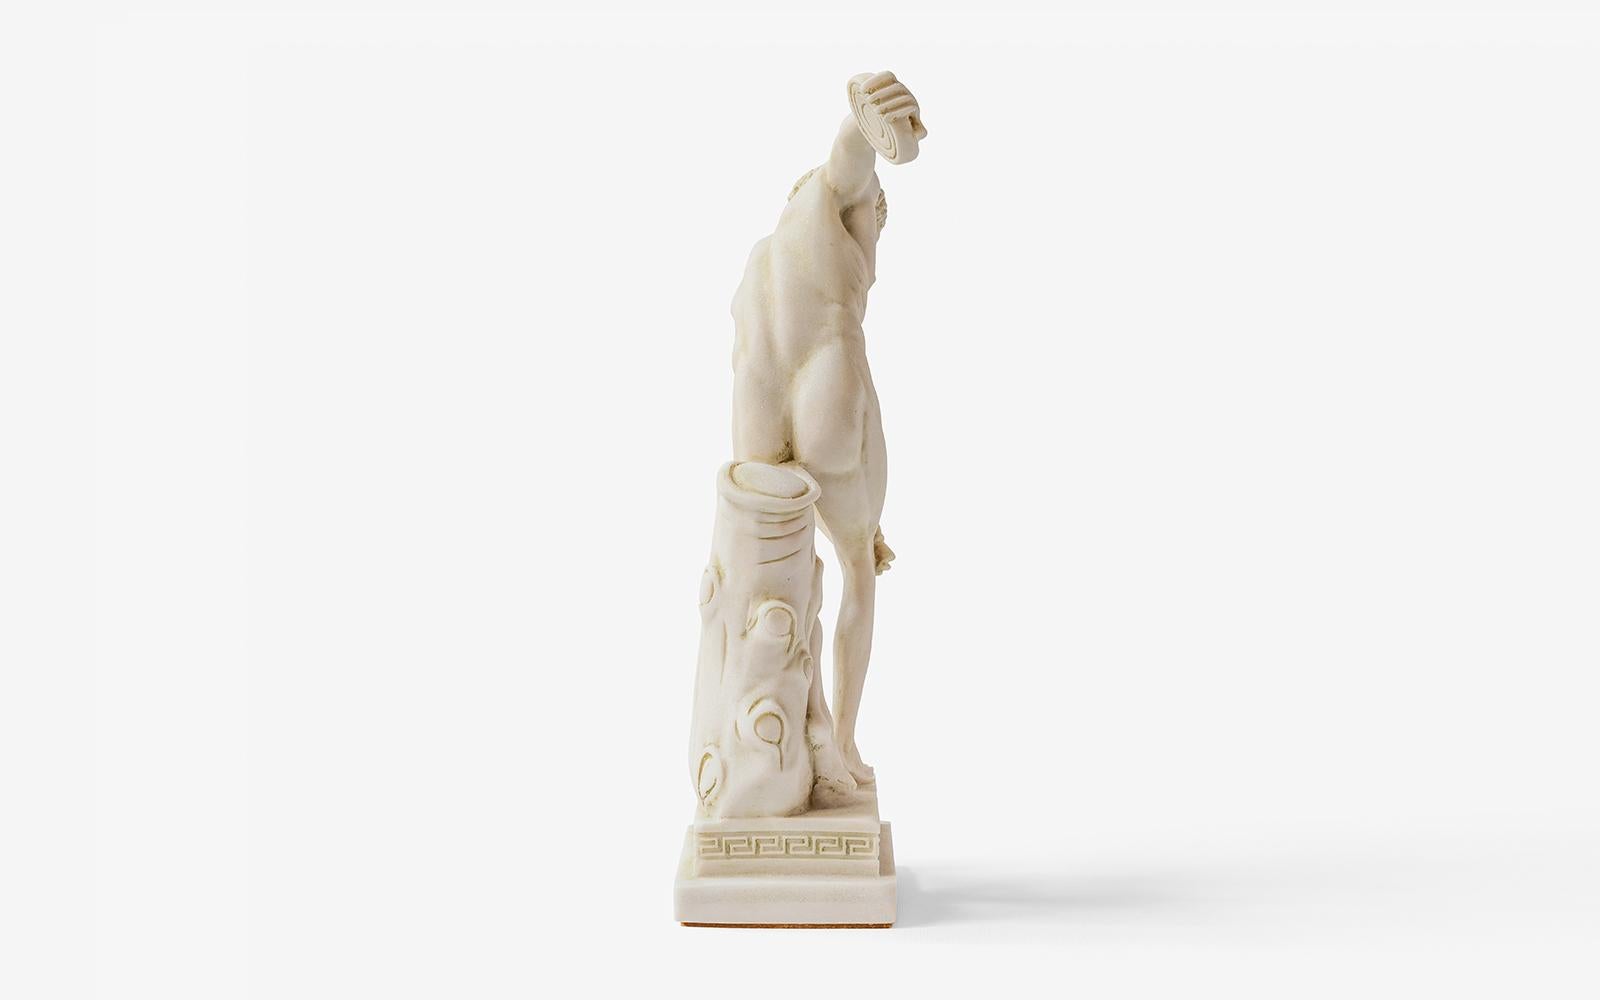 Step into the world of ancient Greece with 'The Athlete Throwing Discus,' a renowned sculpture also known as Discobolus, meticulously completed by the skilled artist Myron during the classical period. While the original bronze masterpiece that